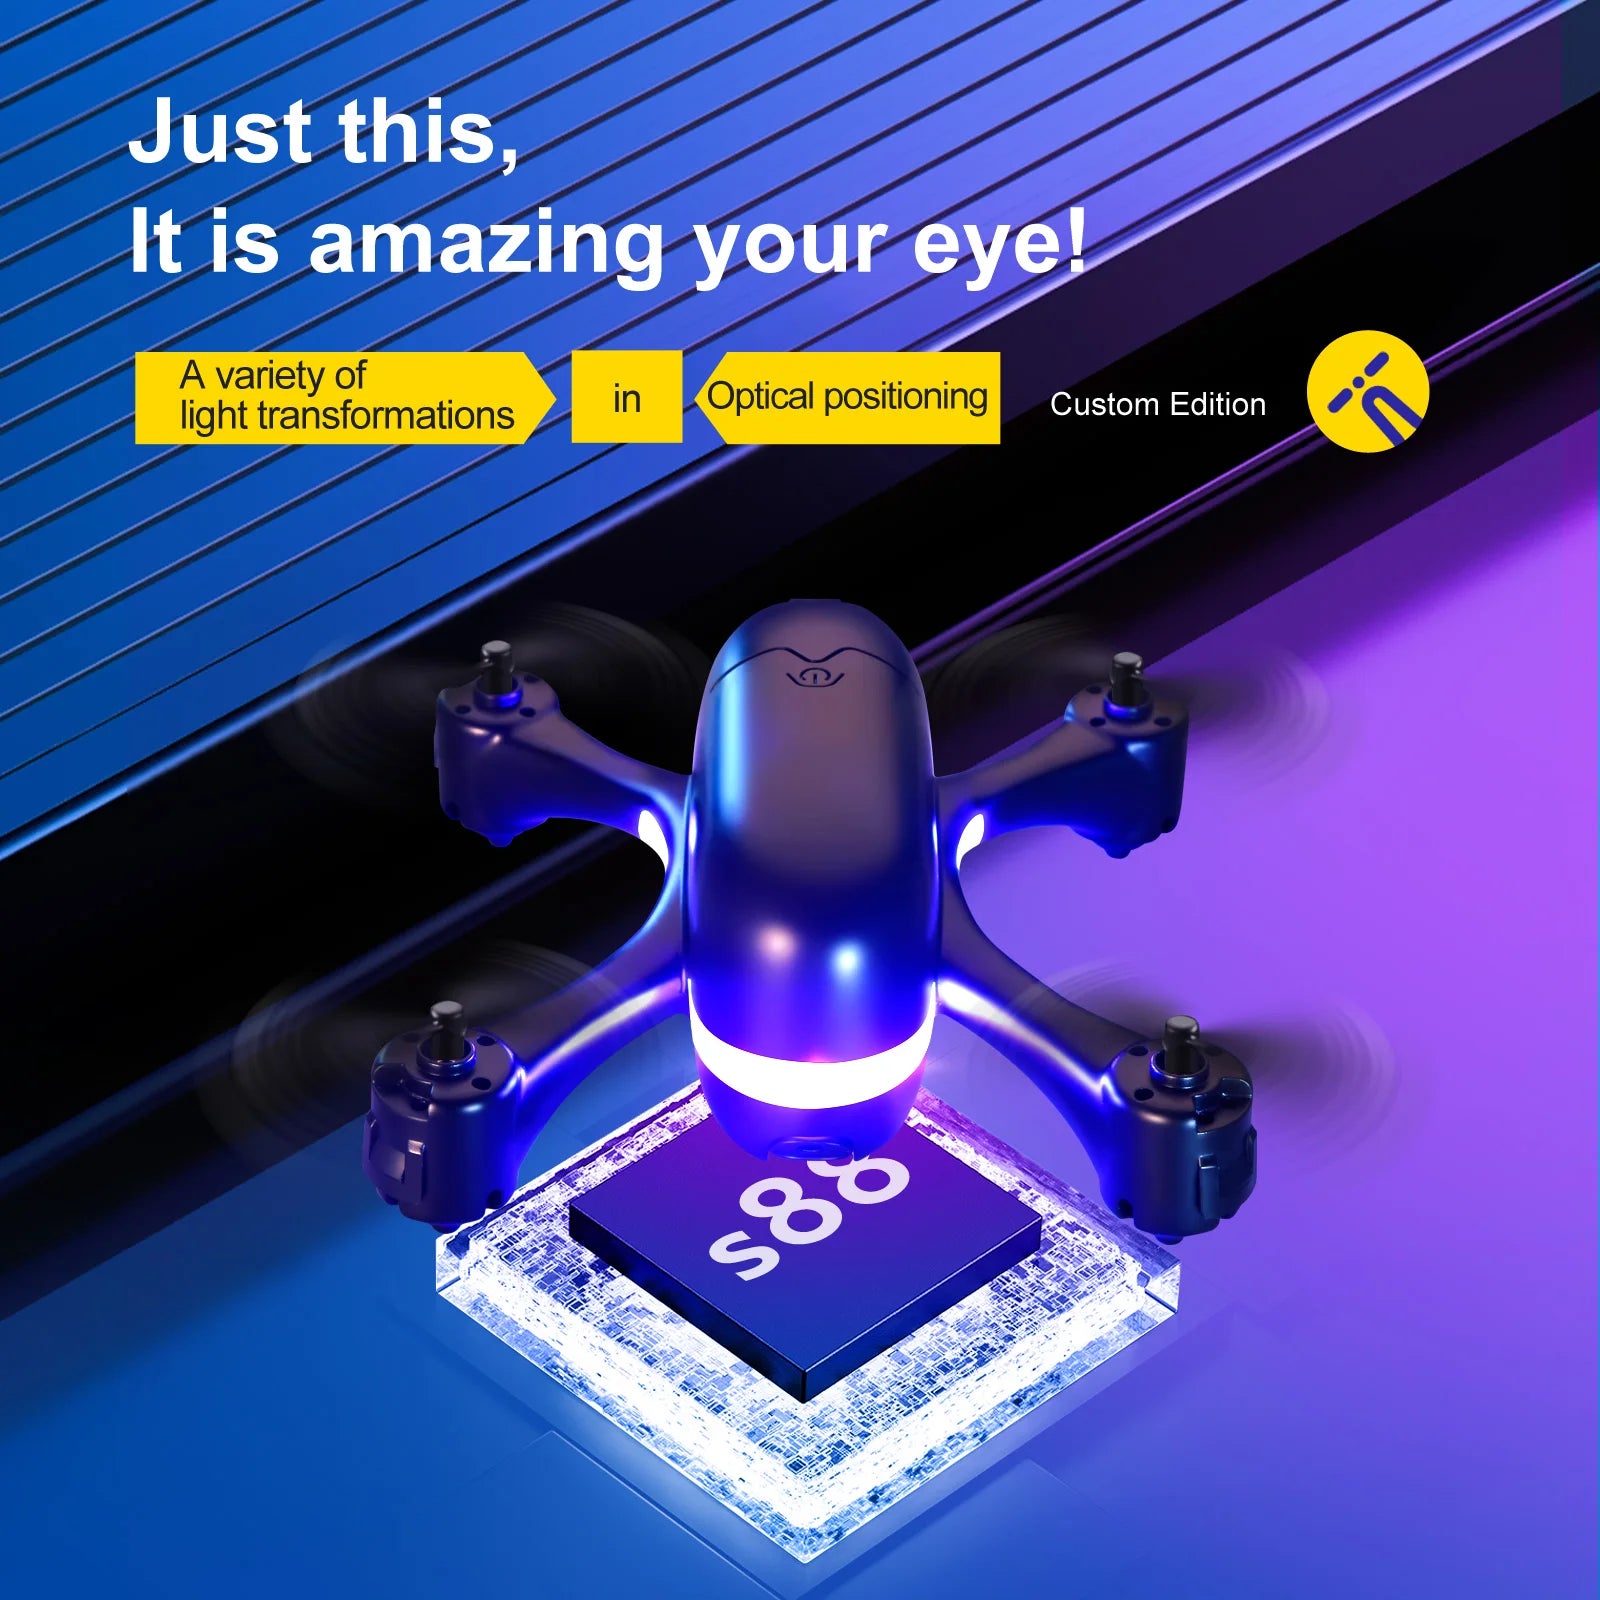 S88 Drone, it is amazing your eyel a variety of light transformations in